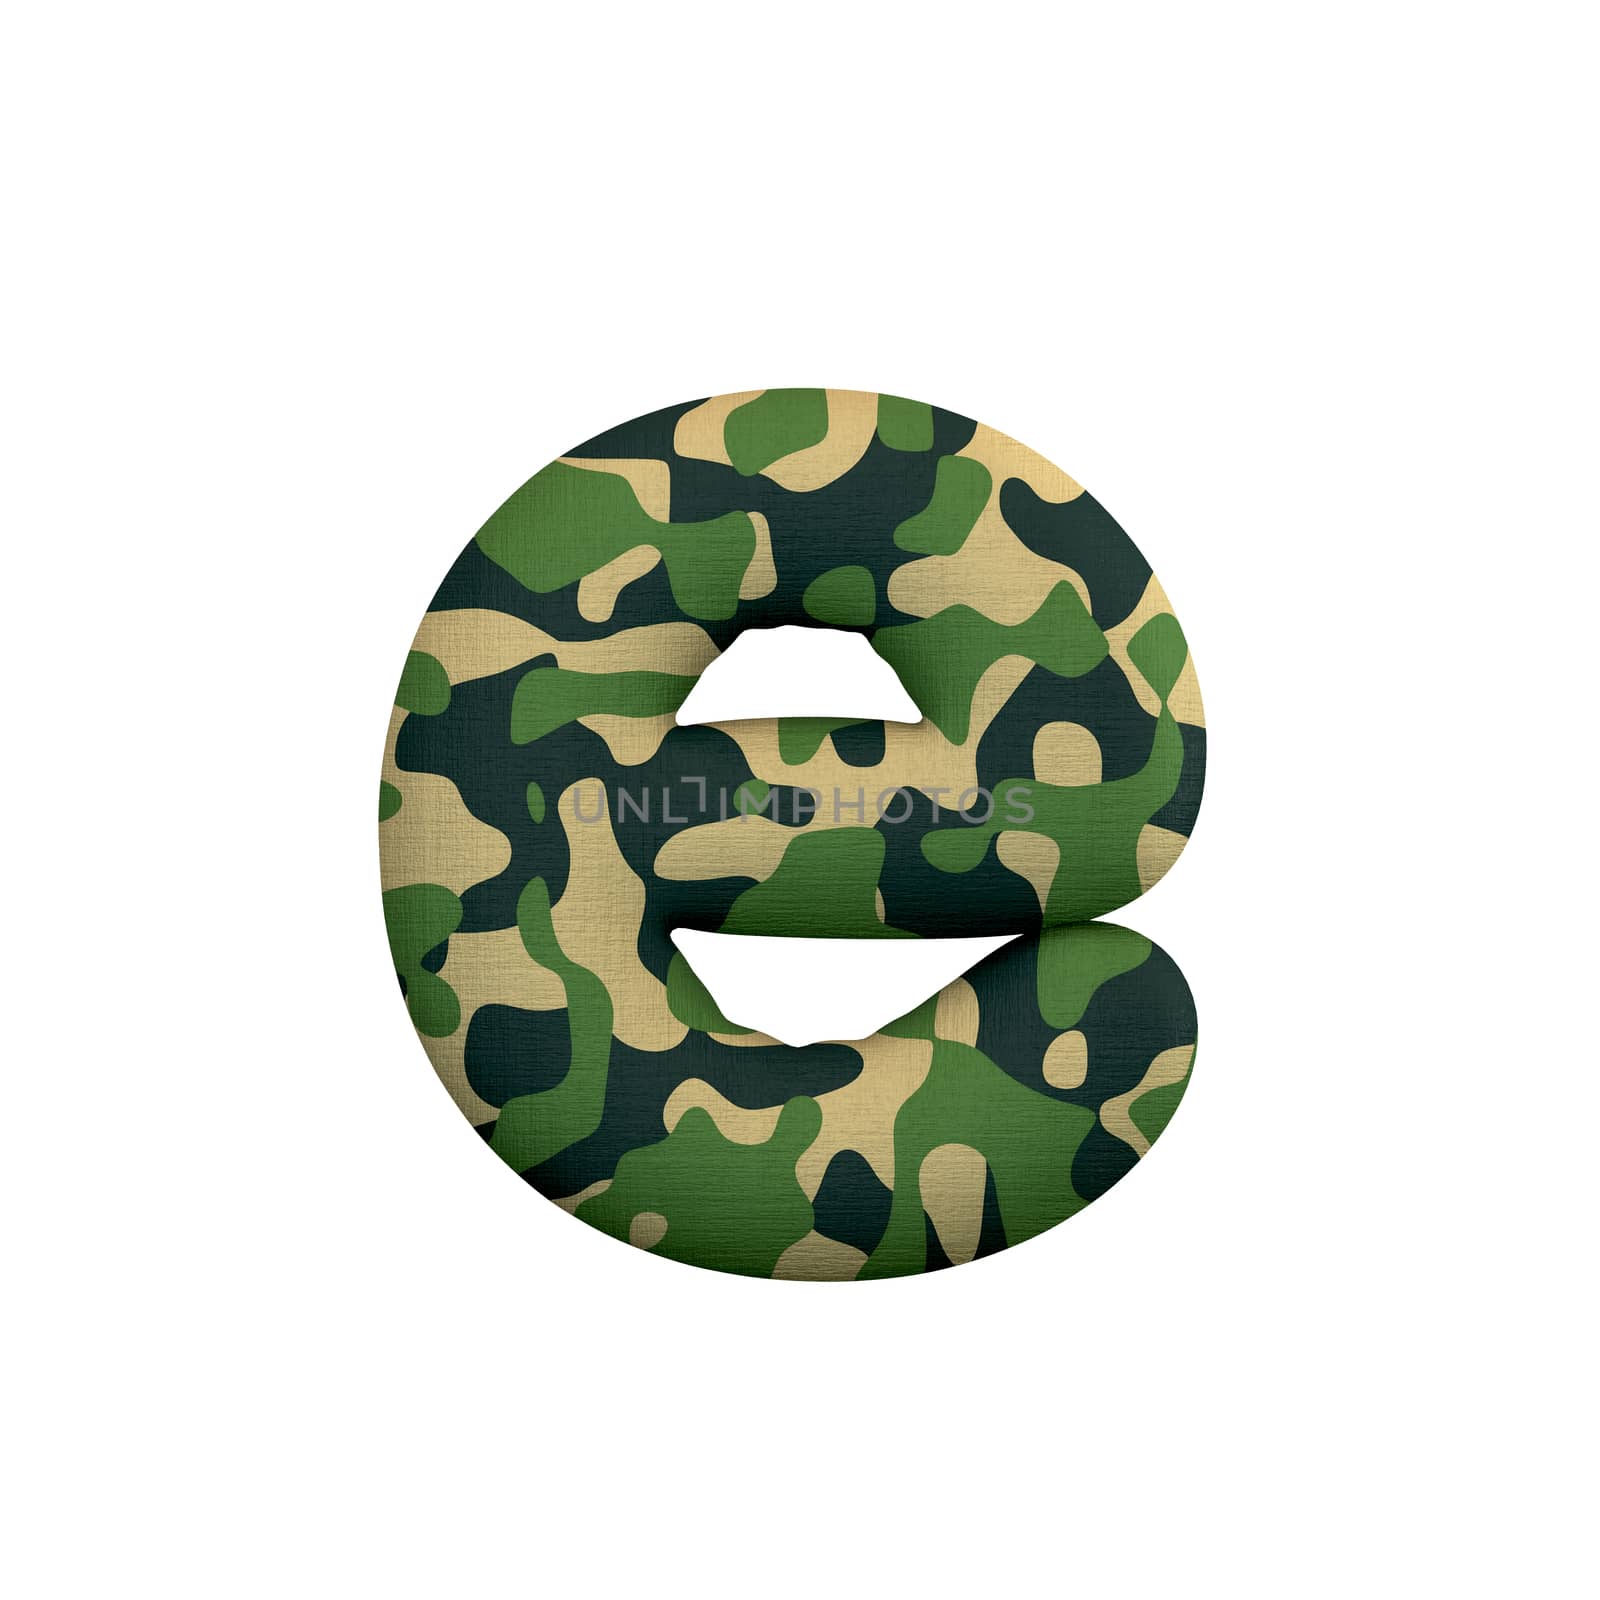 Army letter E - lowercase 3d Camo font isolated on white background. This alphabet is perfect for creative illustrations related but not limited to Army, war, survivalism...